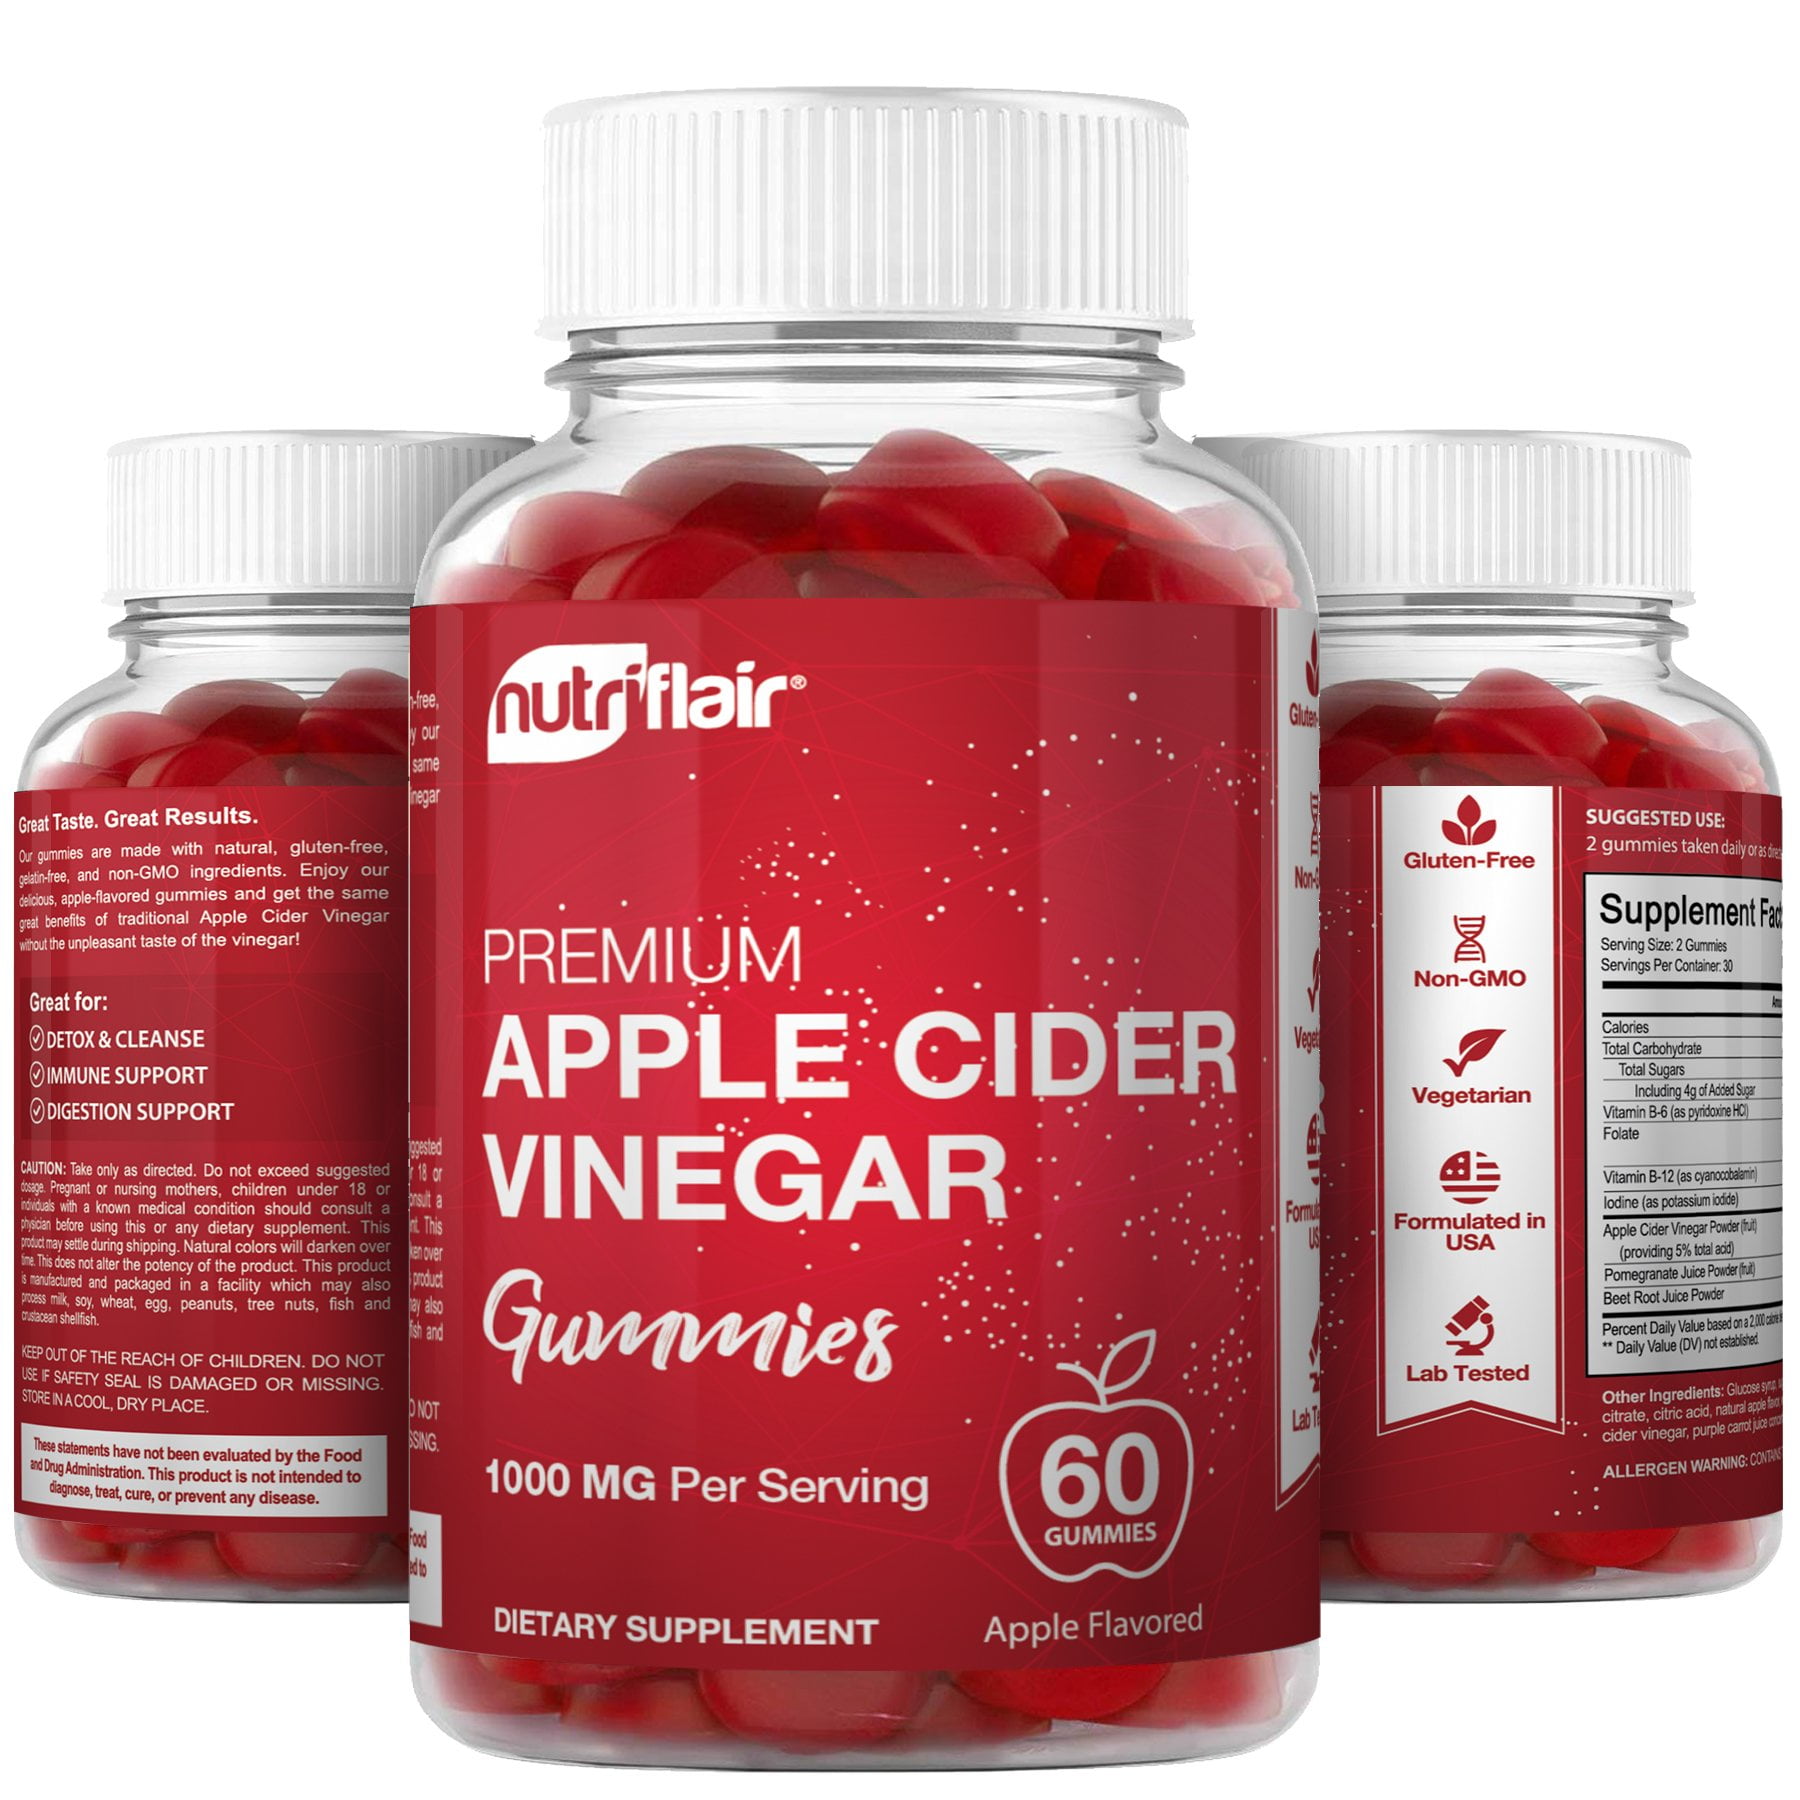 The Facts About Goli Apple Cider Vinegar Gummies Review (UPDATE: 2021 Revea...